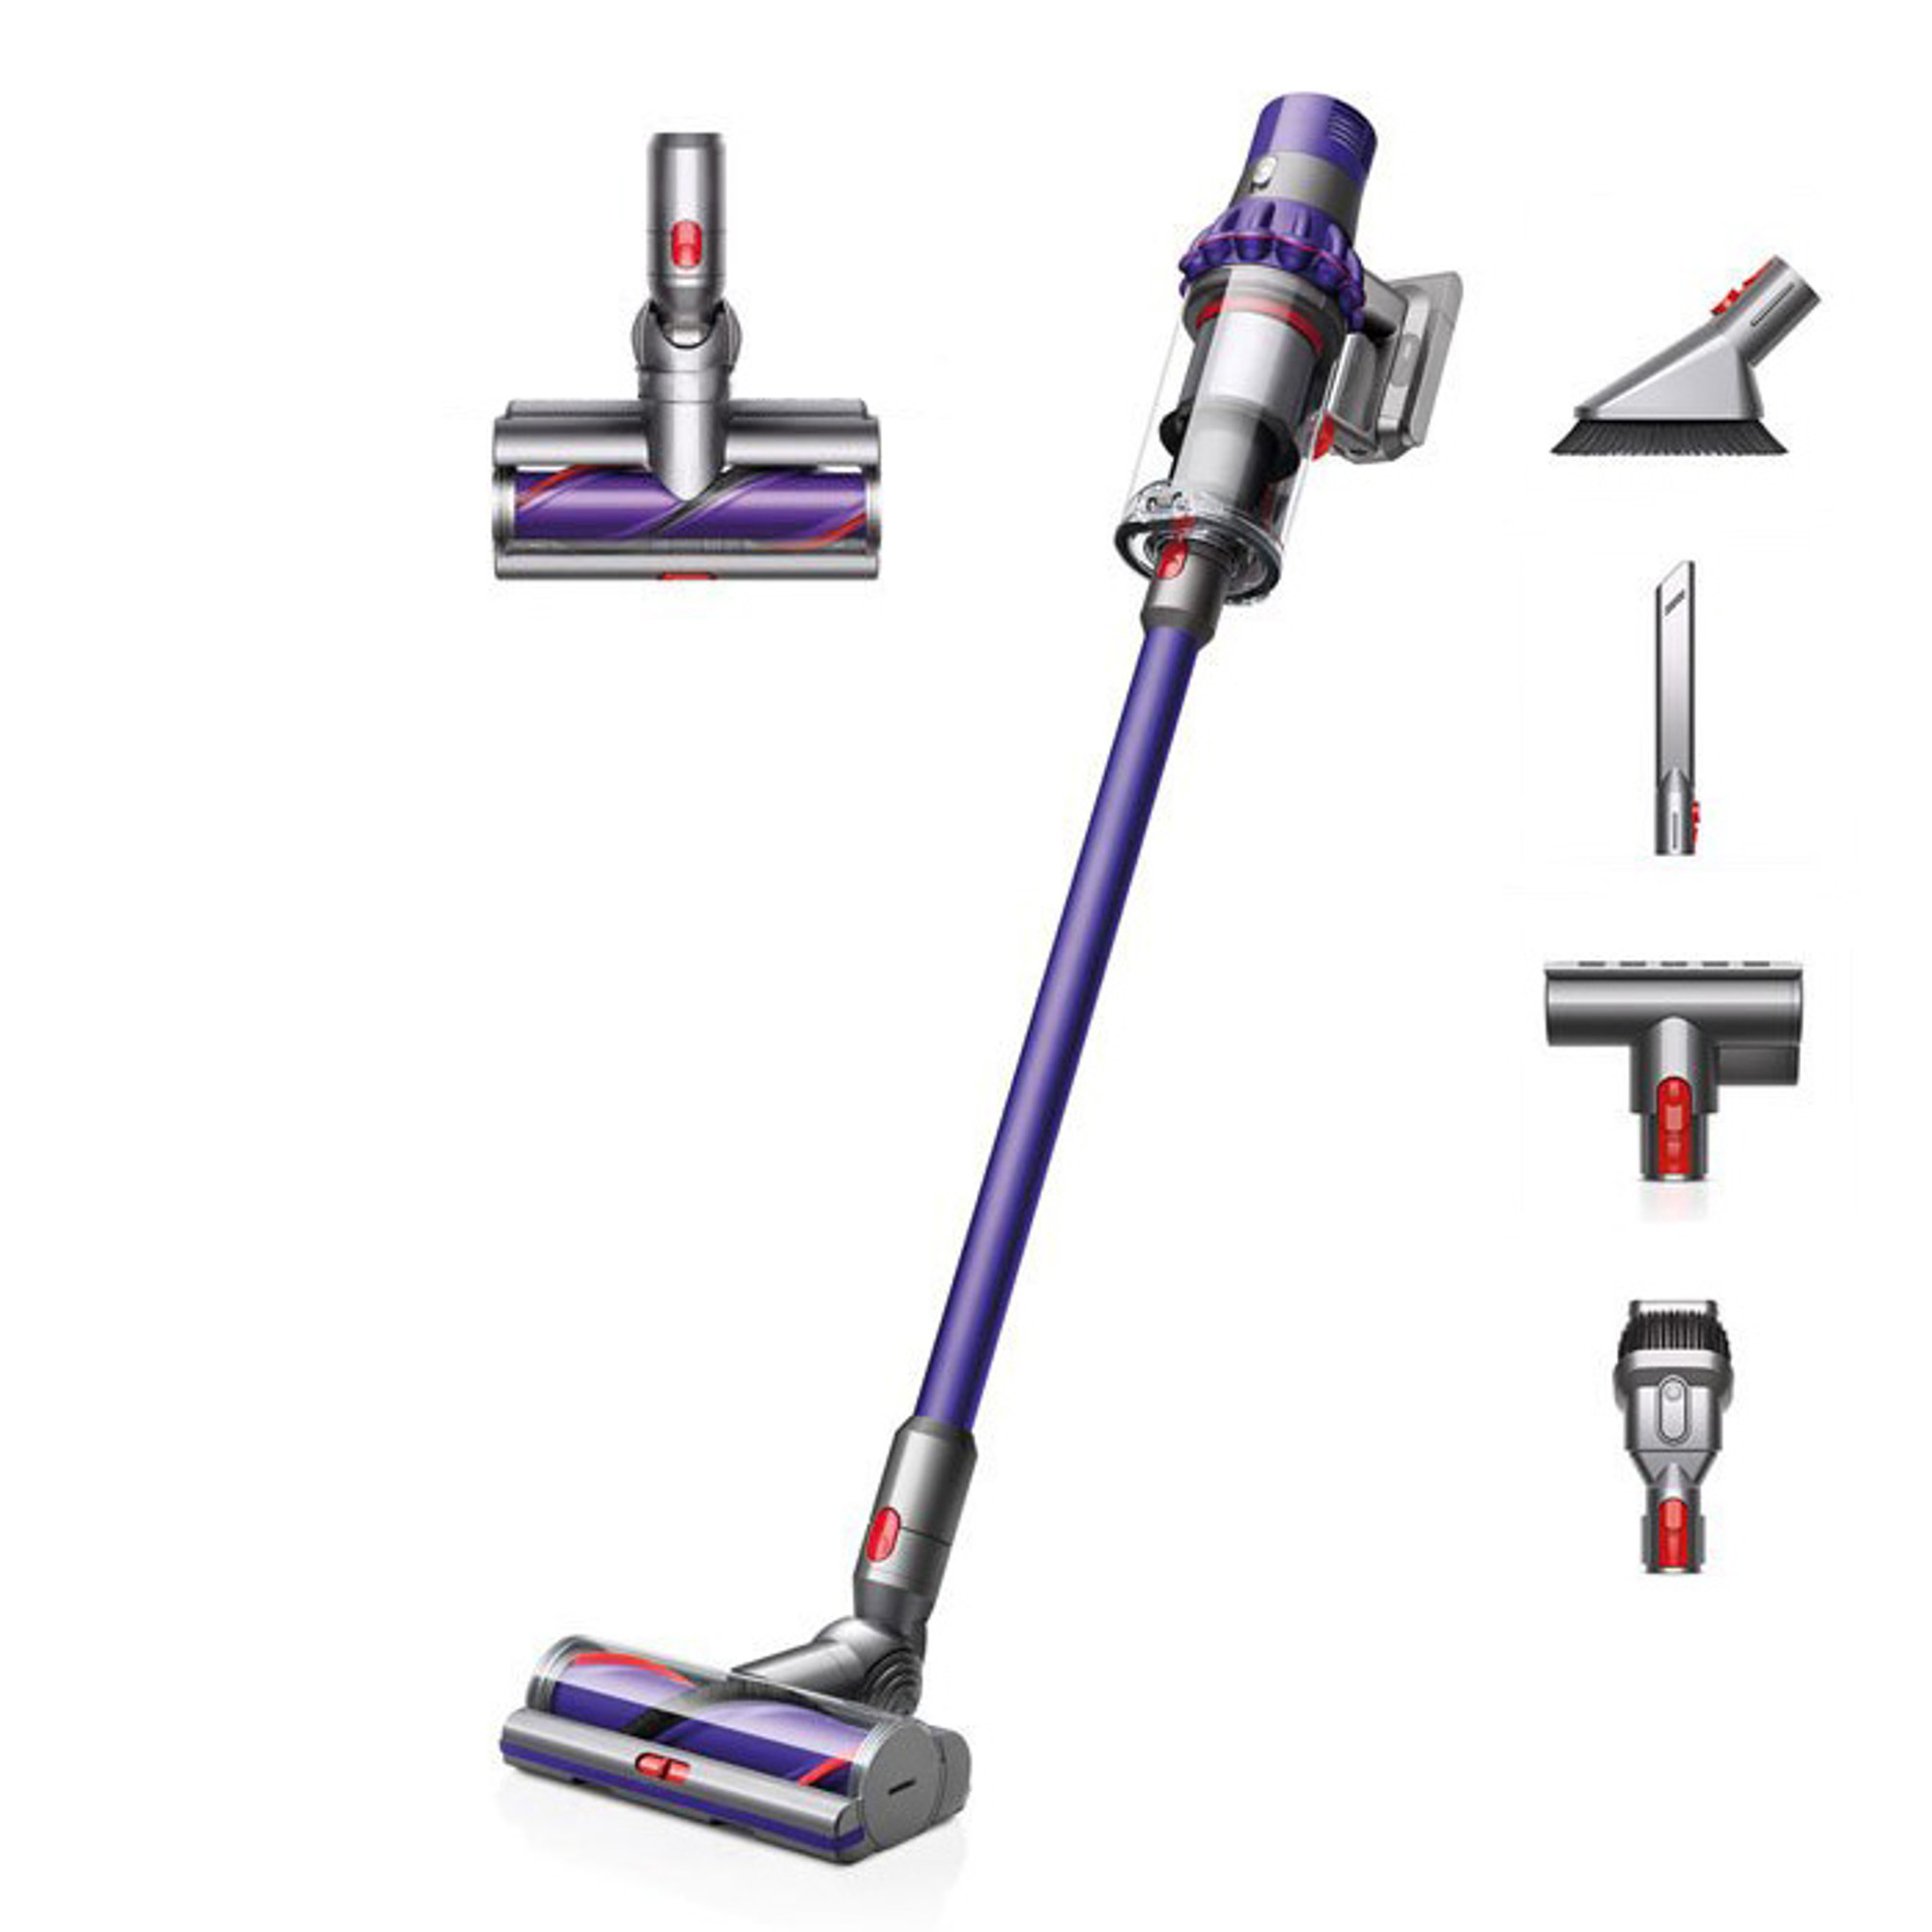 Dyson cyclone v10 animal cordless vacuum cleaner